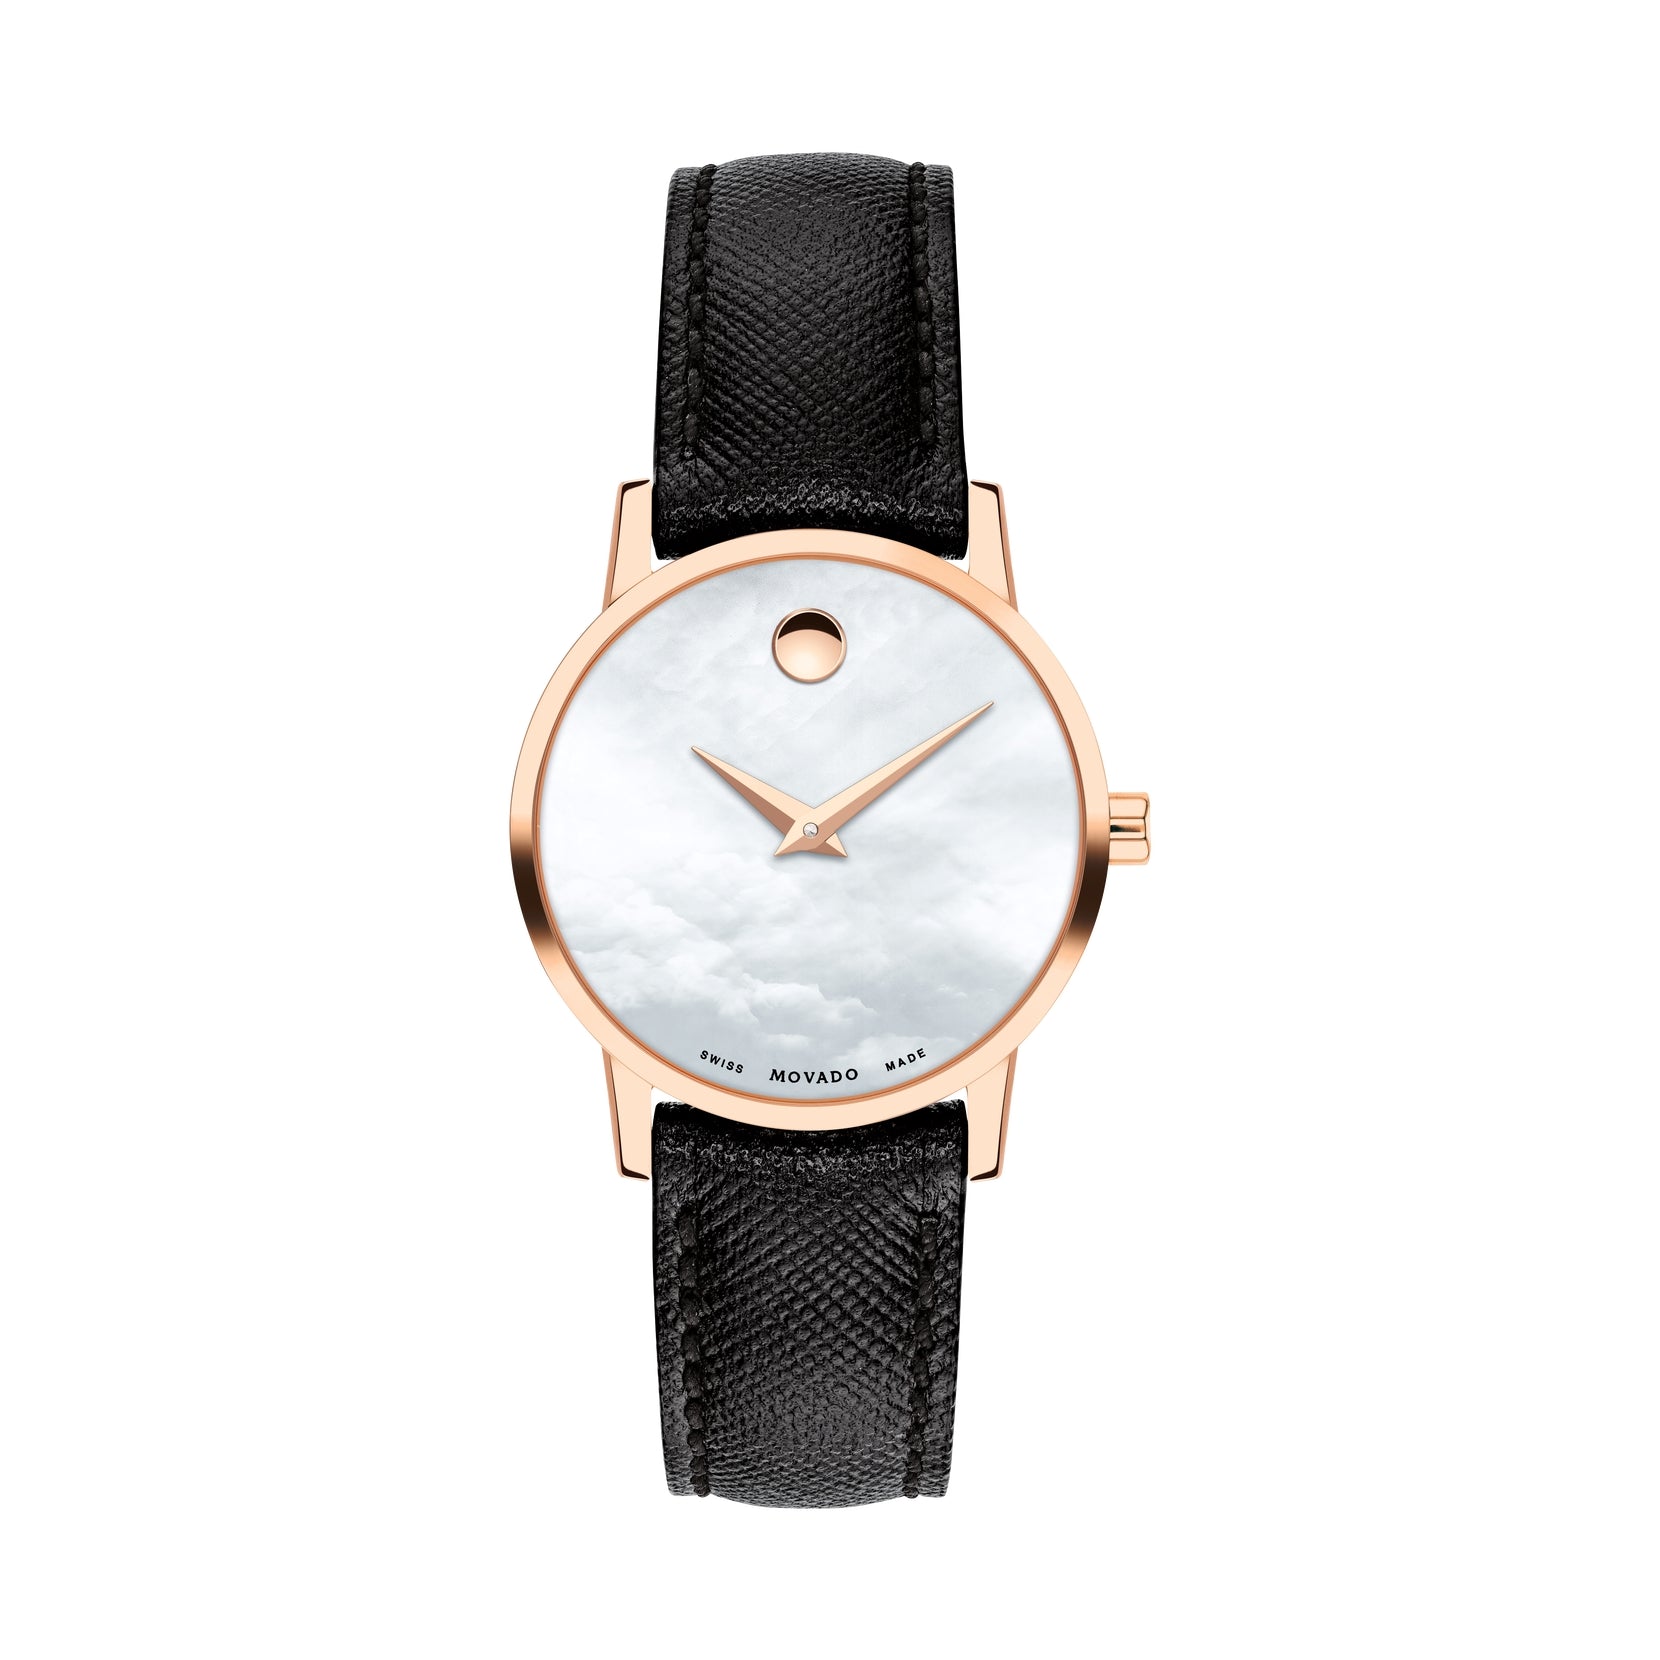 Movado Museum Classic Quartz White Mother of Pearl Dial Ladies Watch 0607424